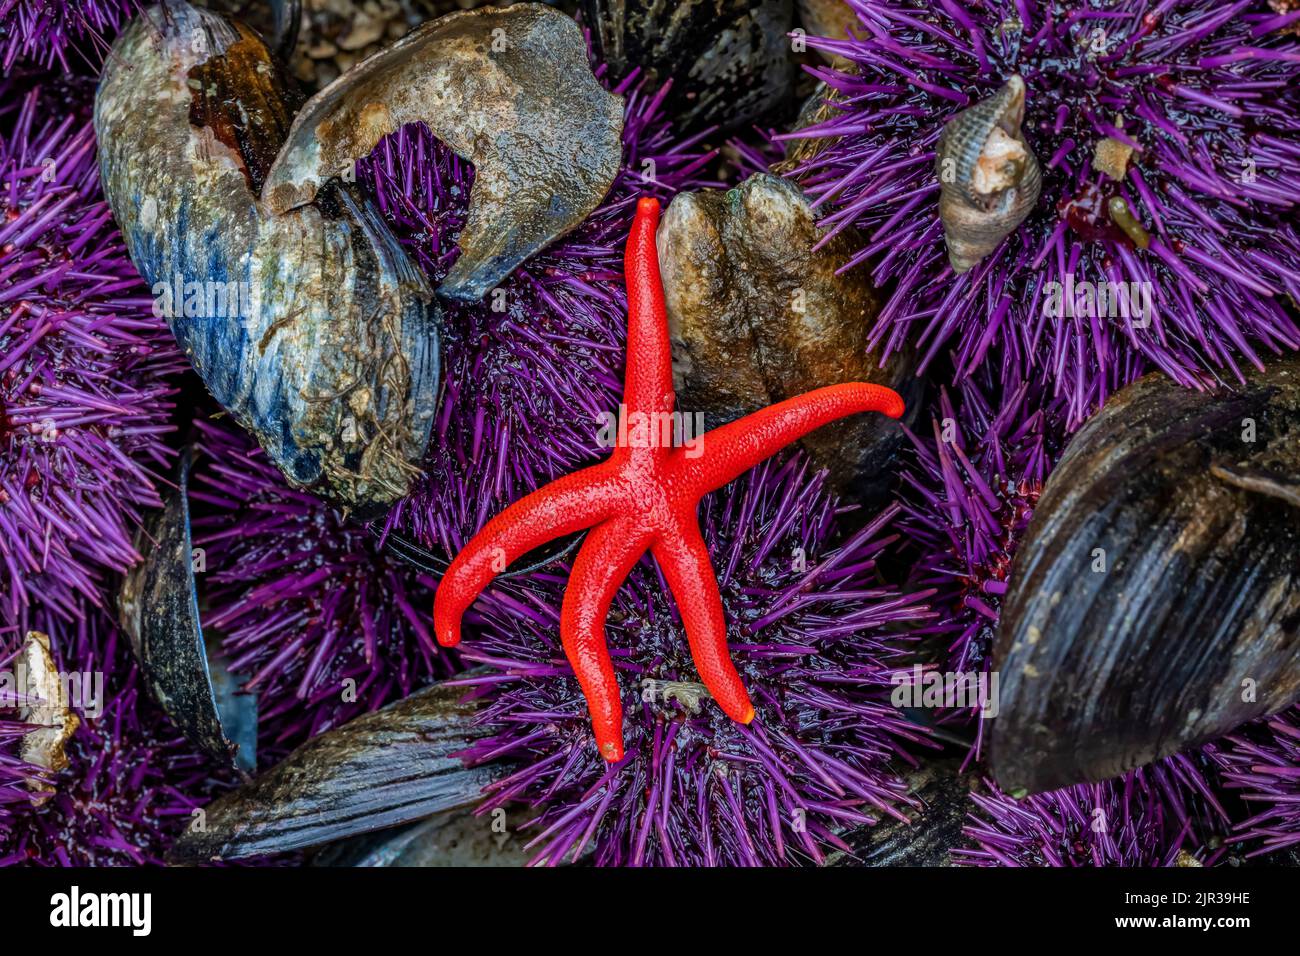 Blood Star with Purple Sea Urchins at Tongue Point in Salt Creek Recreation Area along the Strait of Juan de Fuca, Olympic Peninsula, Washington State Stock Photo